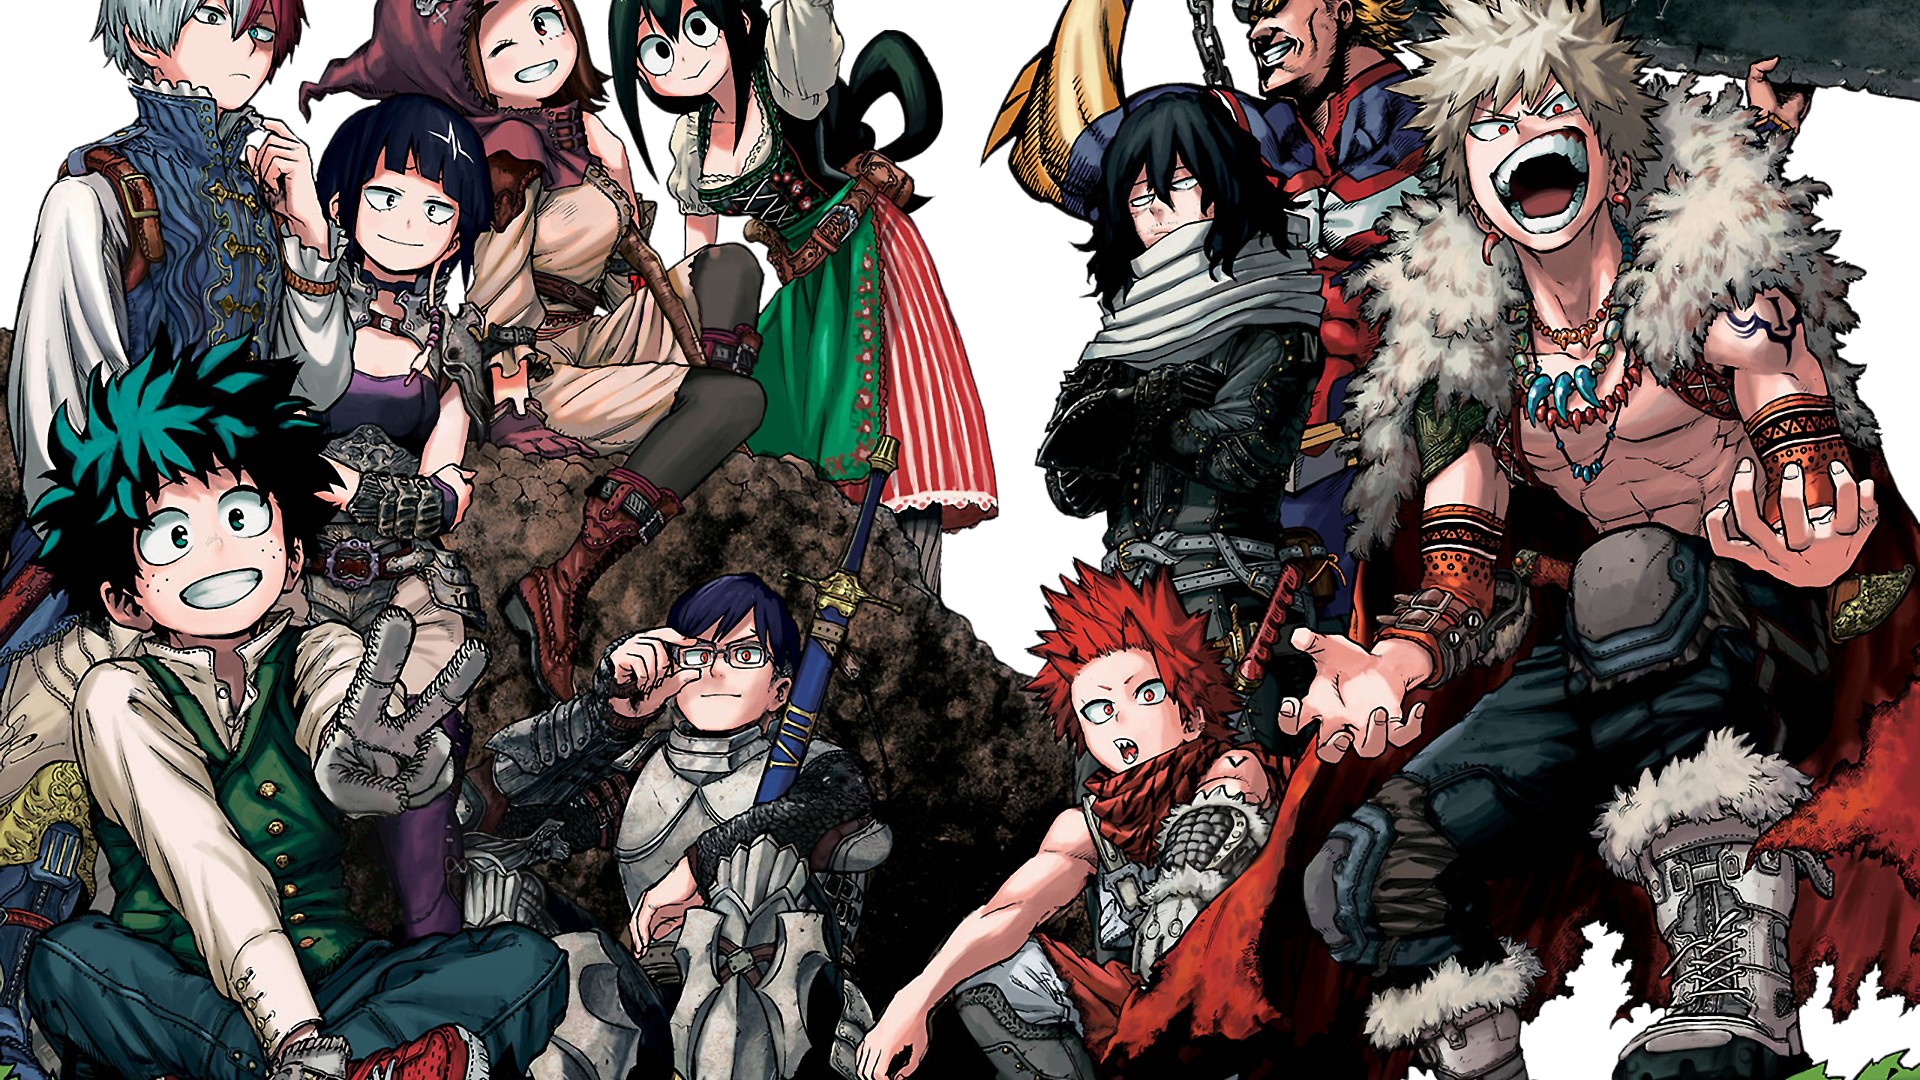 My Hero Academia Poster HD Wallpaper With high-resolution 1920X1080 pixel. You can use this poster wallpaper for your Desktop Computers, Mac Screensavers, Windows Backgrounds, iPhone Wallpapers, Tablet or Android Lock screen and another Mobile device